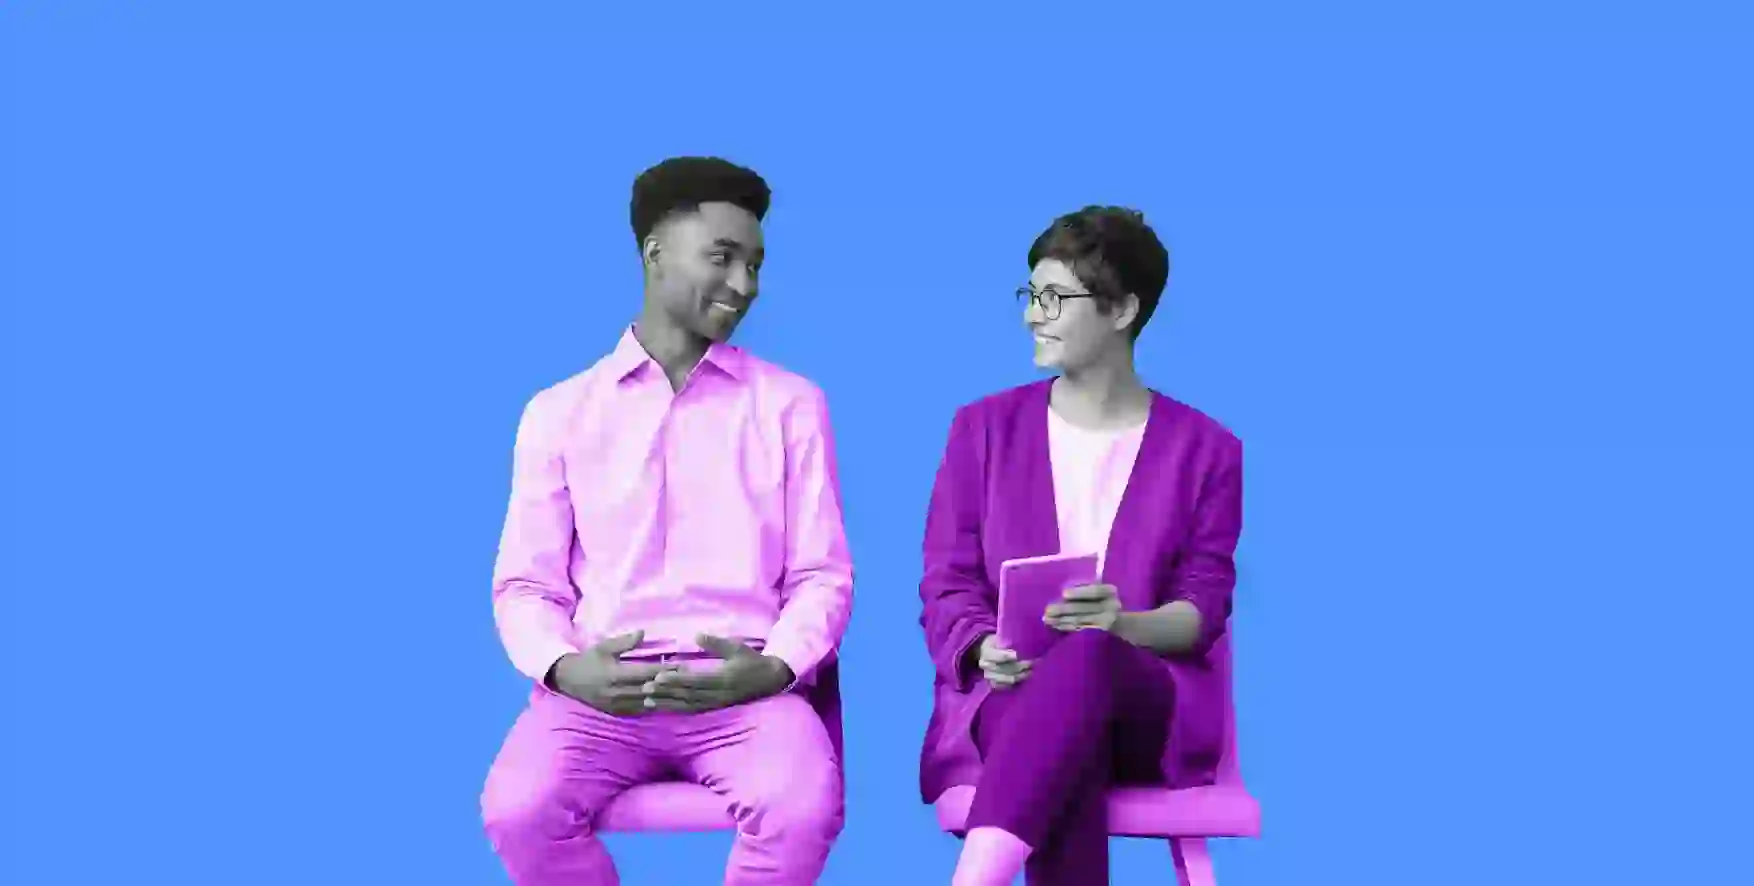 two people sitting next to each other during an interview